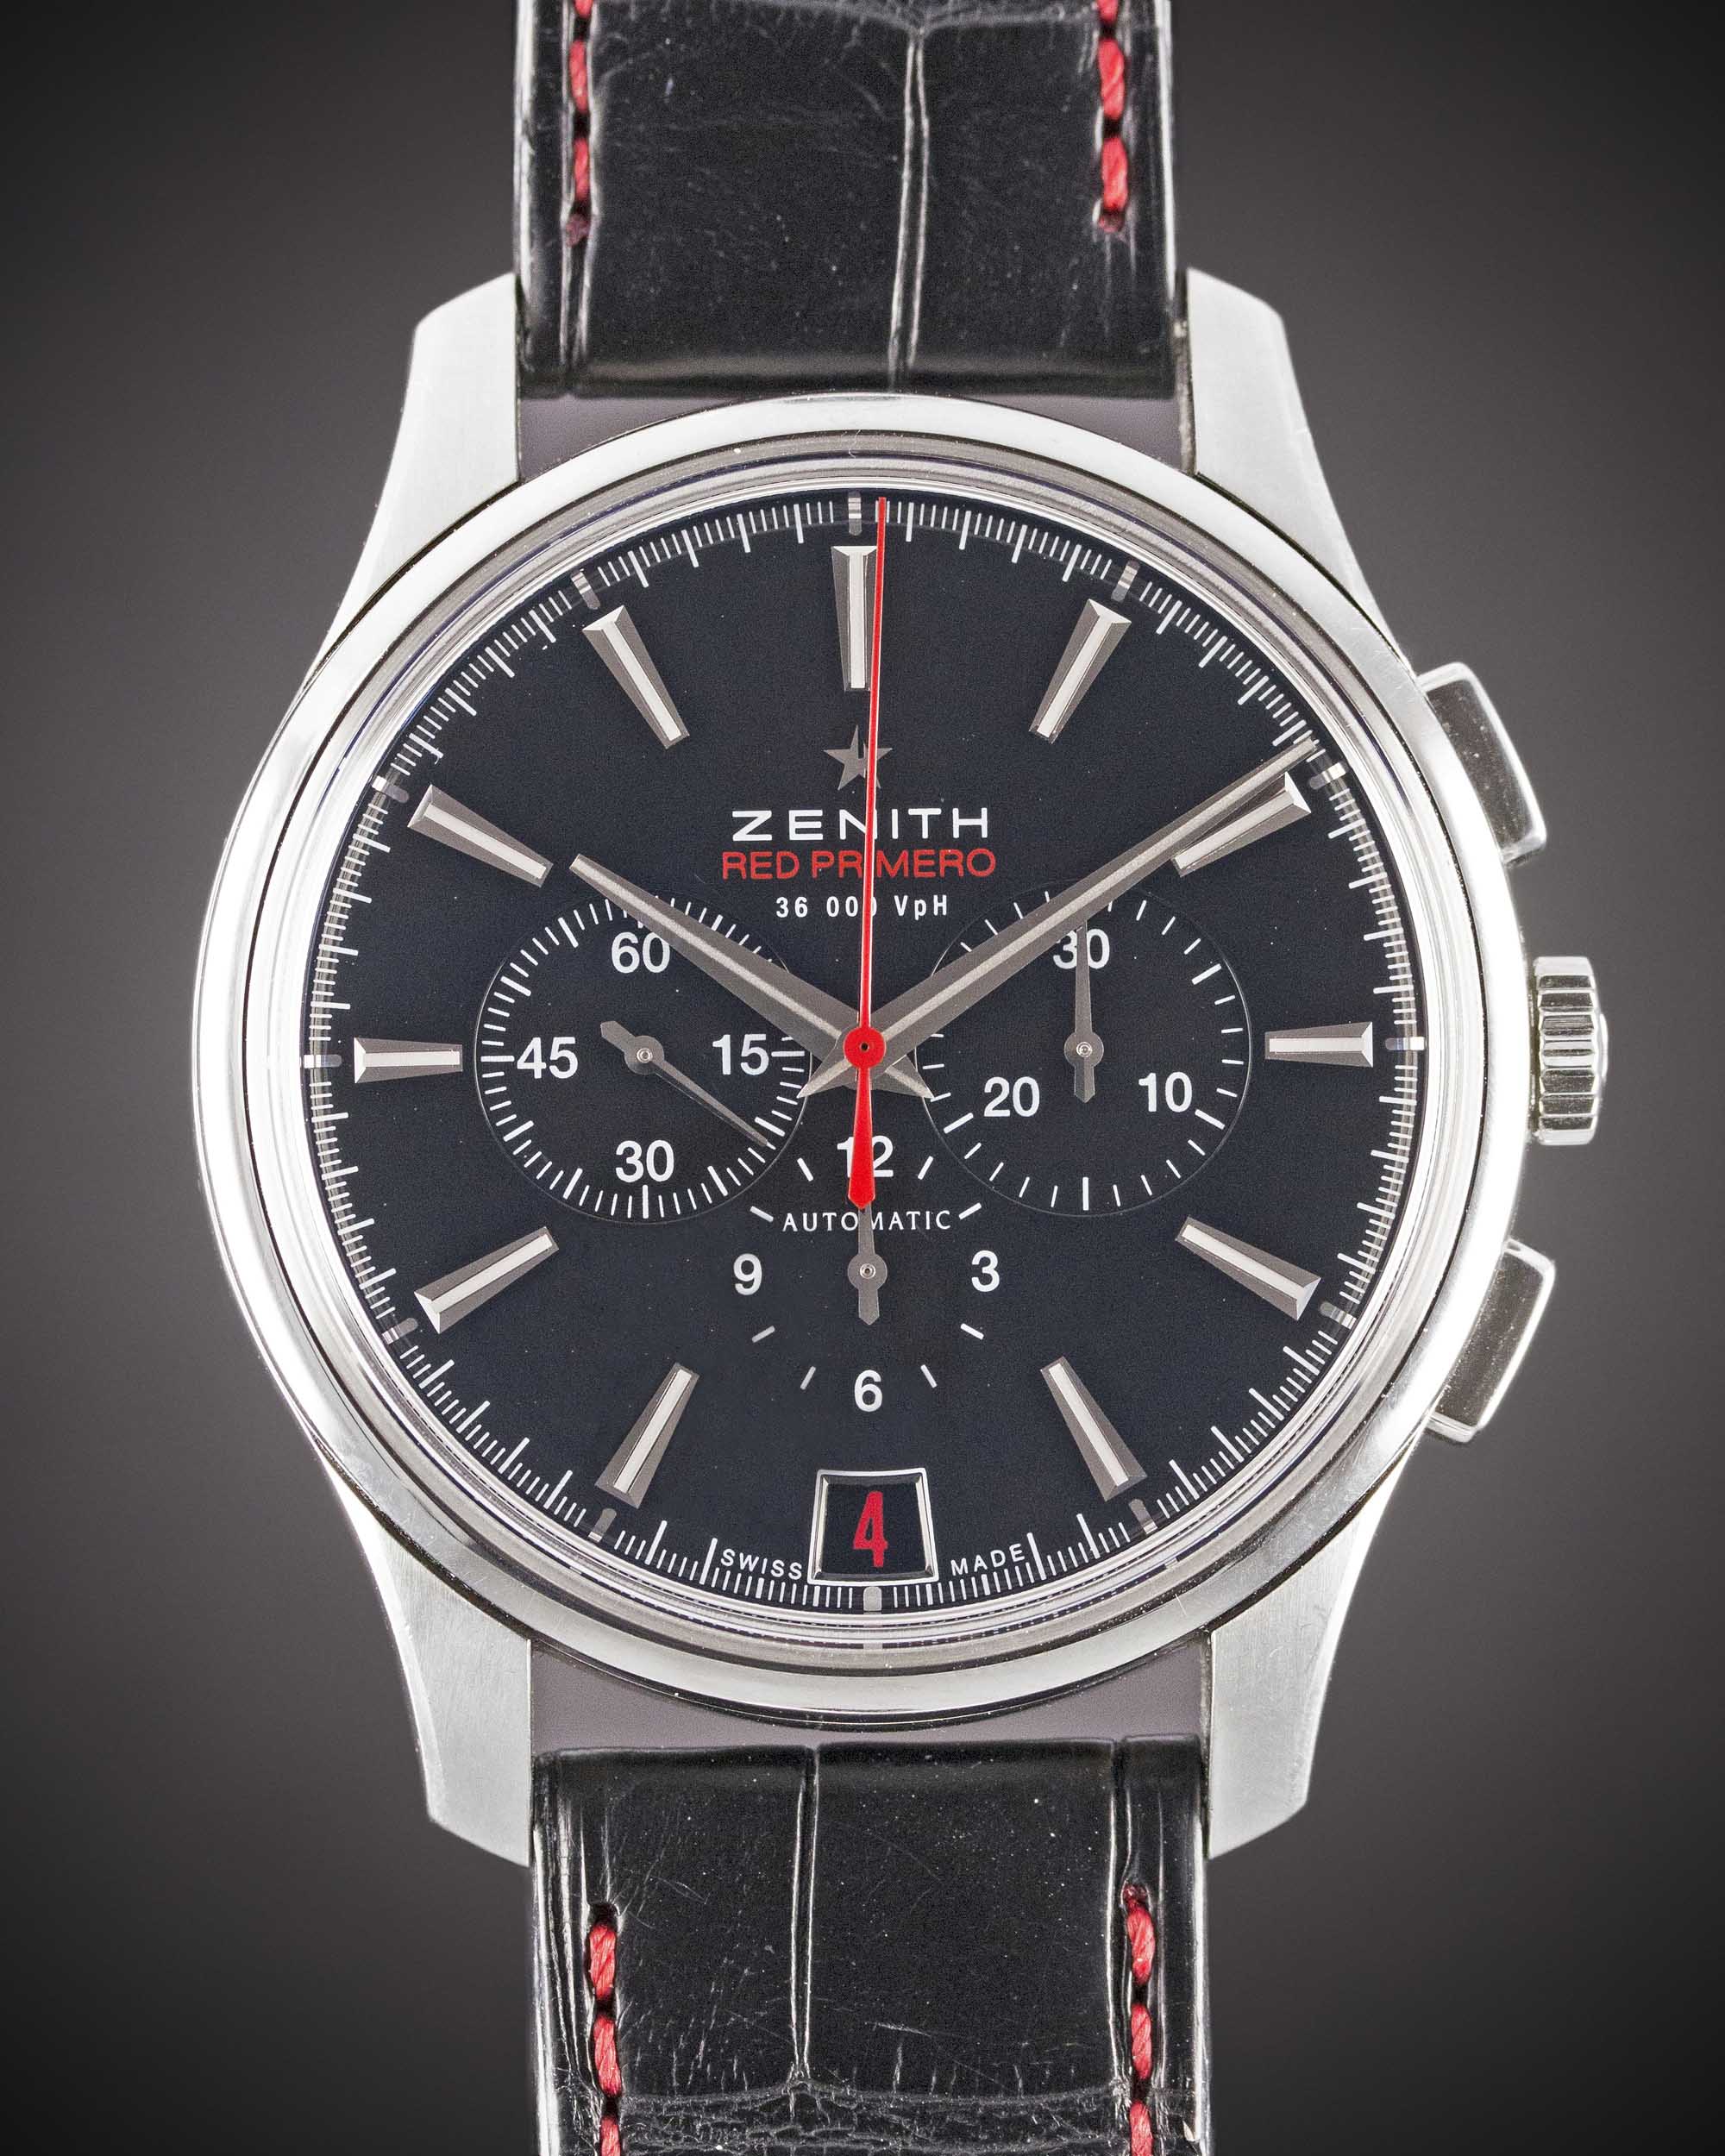 A GENTLEMAN'S STAINLESS STEEL ZENITH RED PRIMERO CAPTAIN AUTOMATIC CHRONOGRAPH WRIST WATCH DATED